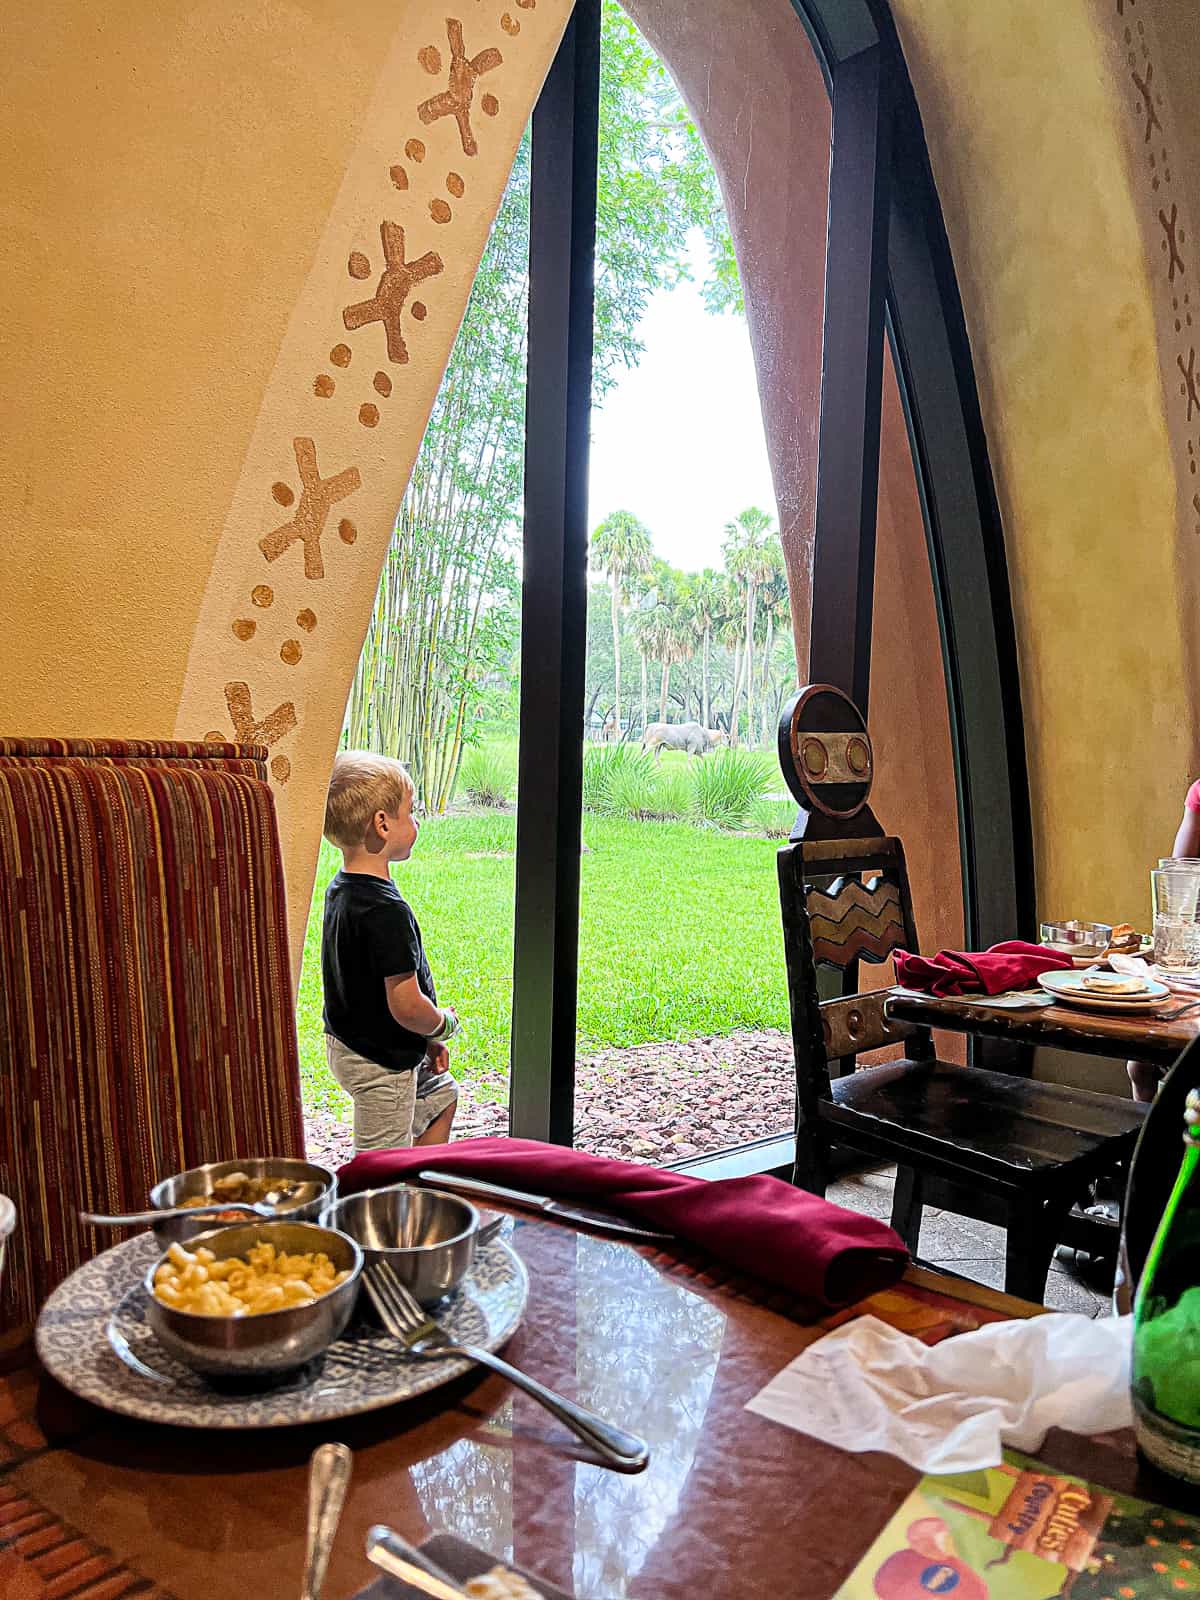 Entertaining Kids at Sanaa Restaurant during lunch with view of animals at Animal Kingdom Lodge Resort